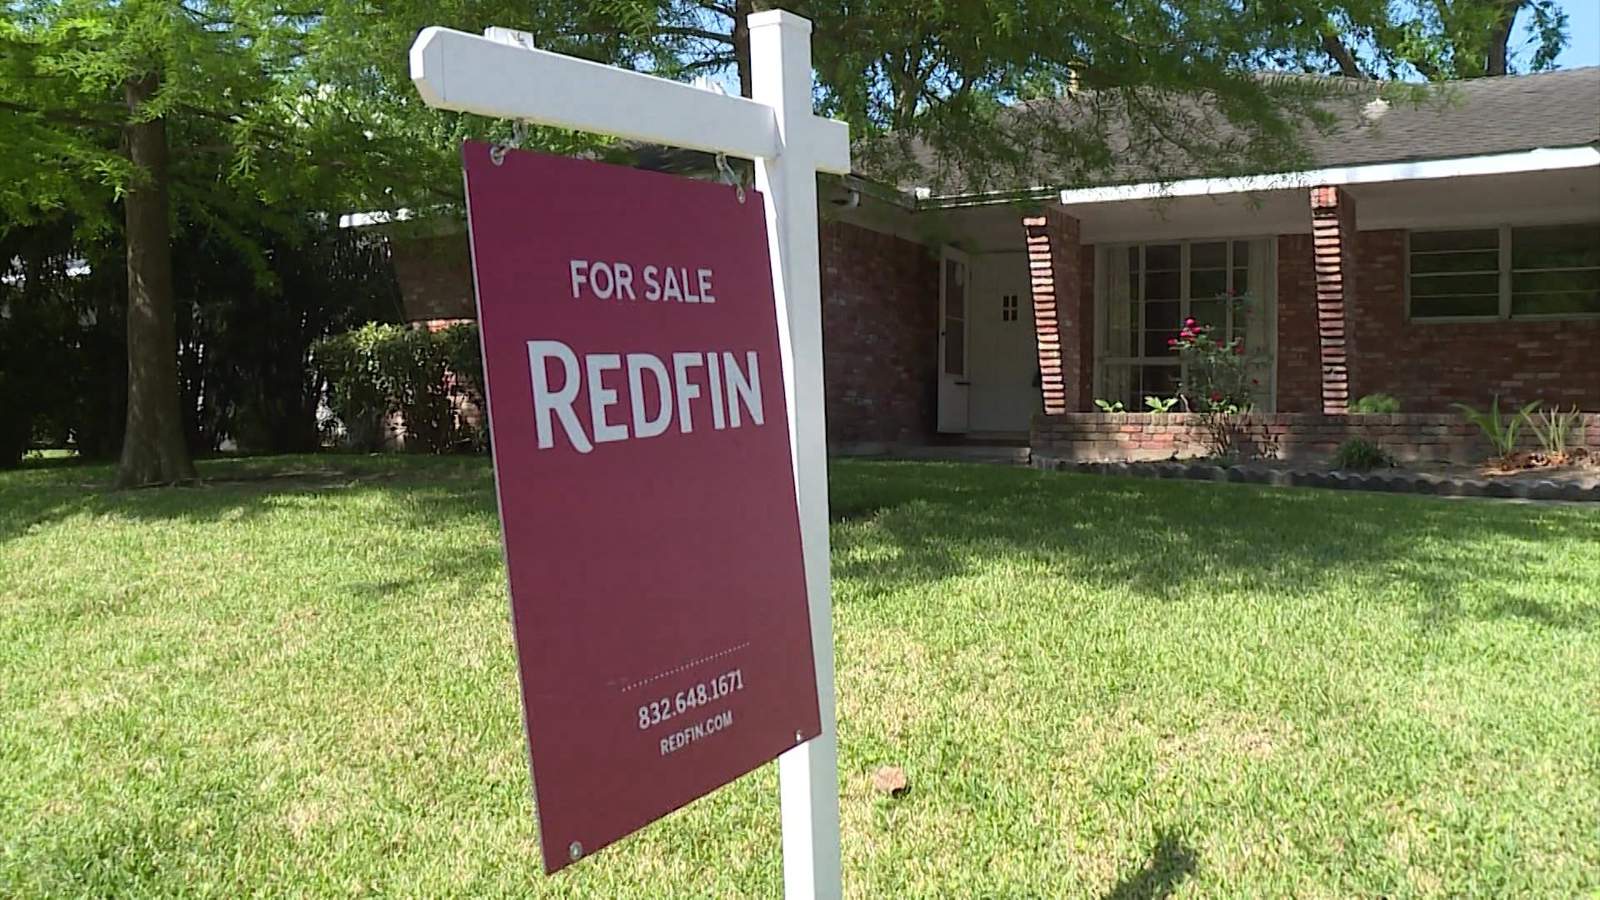 Houston-area realtors use new technology to sell homes during COVID-19 pandemic